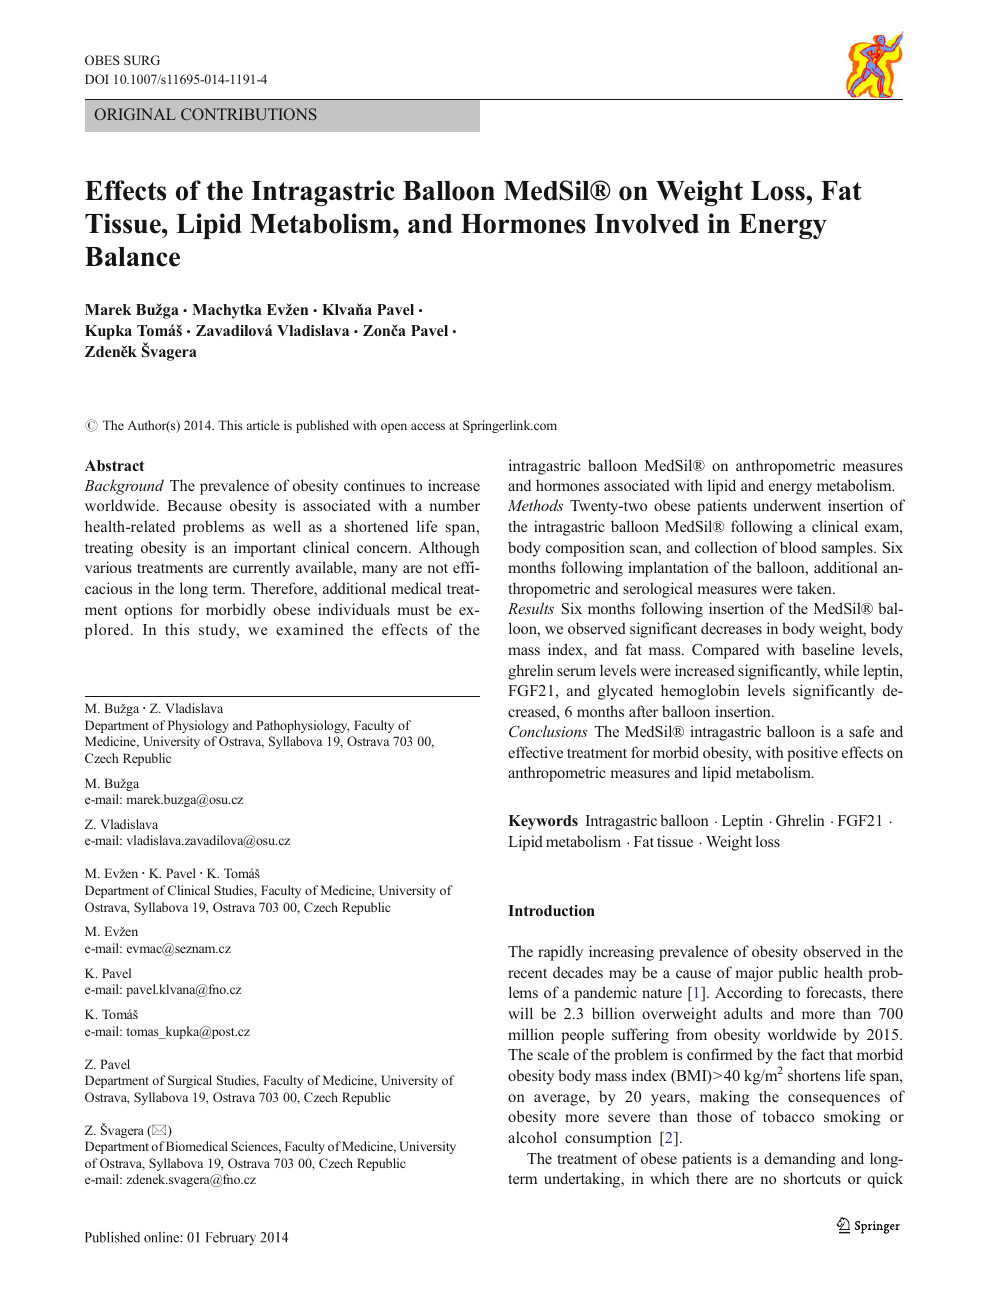 wortel leer Inleg Effects of the Intragastric Balloon MedSil® on Weight Loss, Fat Tissue,  Lipid Metabolism, and Hormones Involved in Energy Balance – topic of  research paper in Health sciences. Download scholarly article PDF and